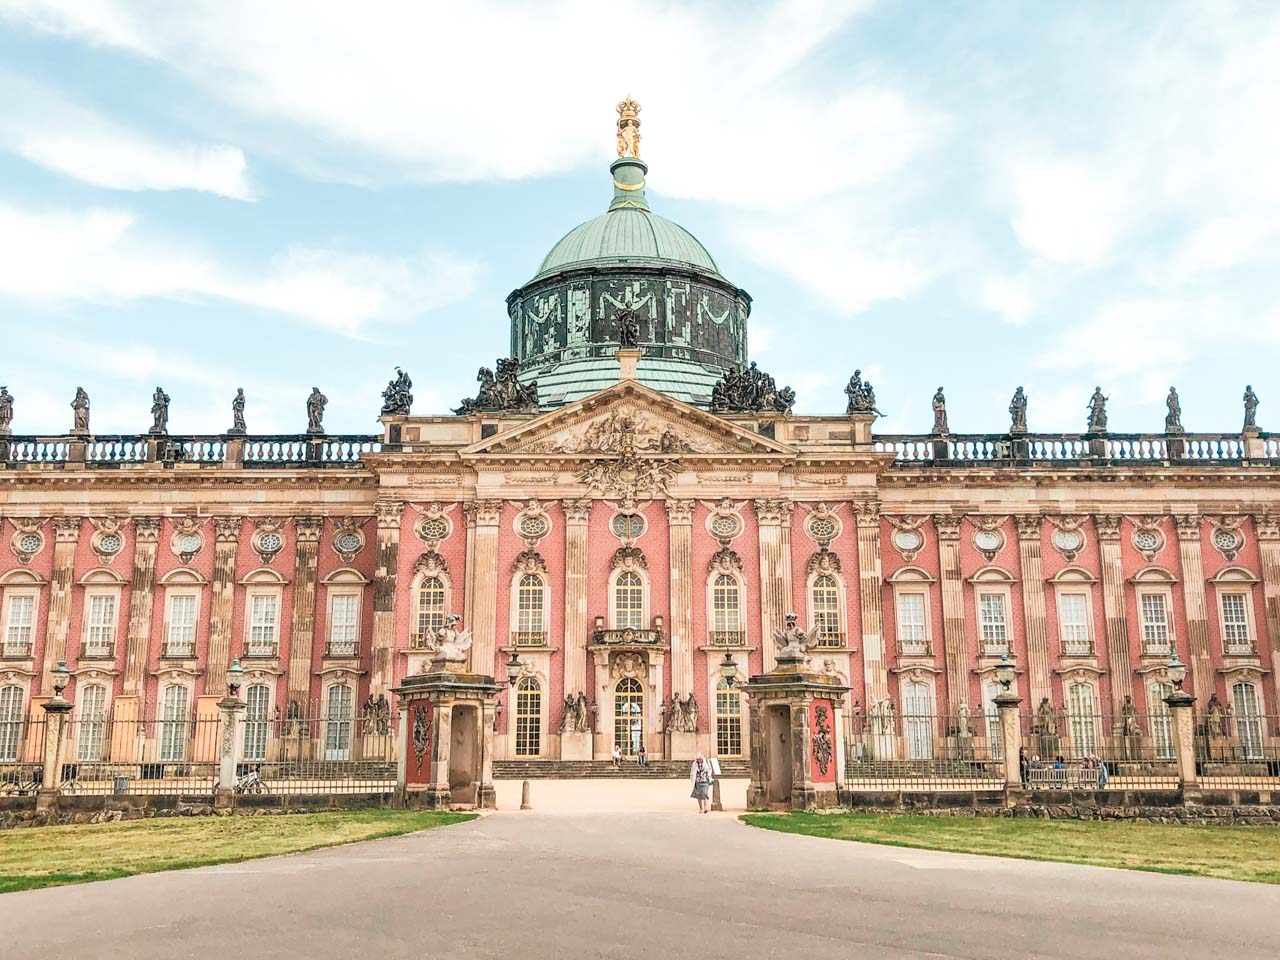 Gate leading to the New Palace in Potsdam, Germany